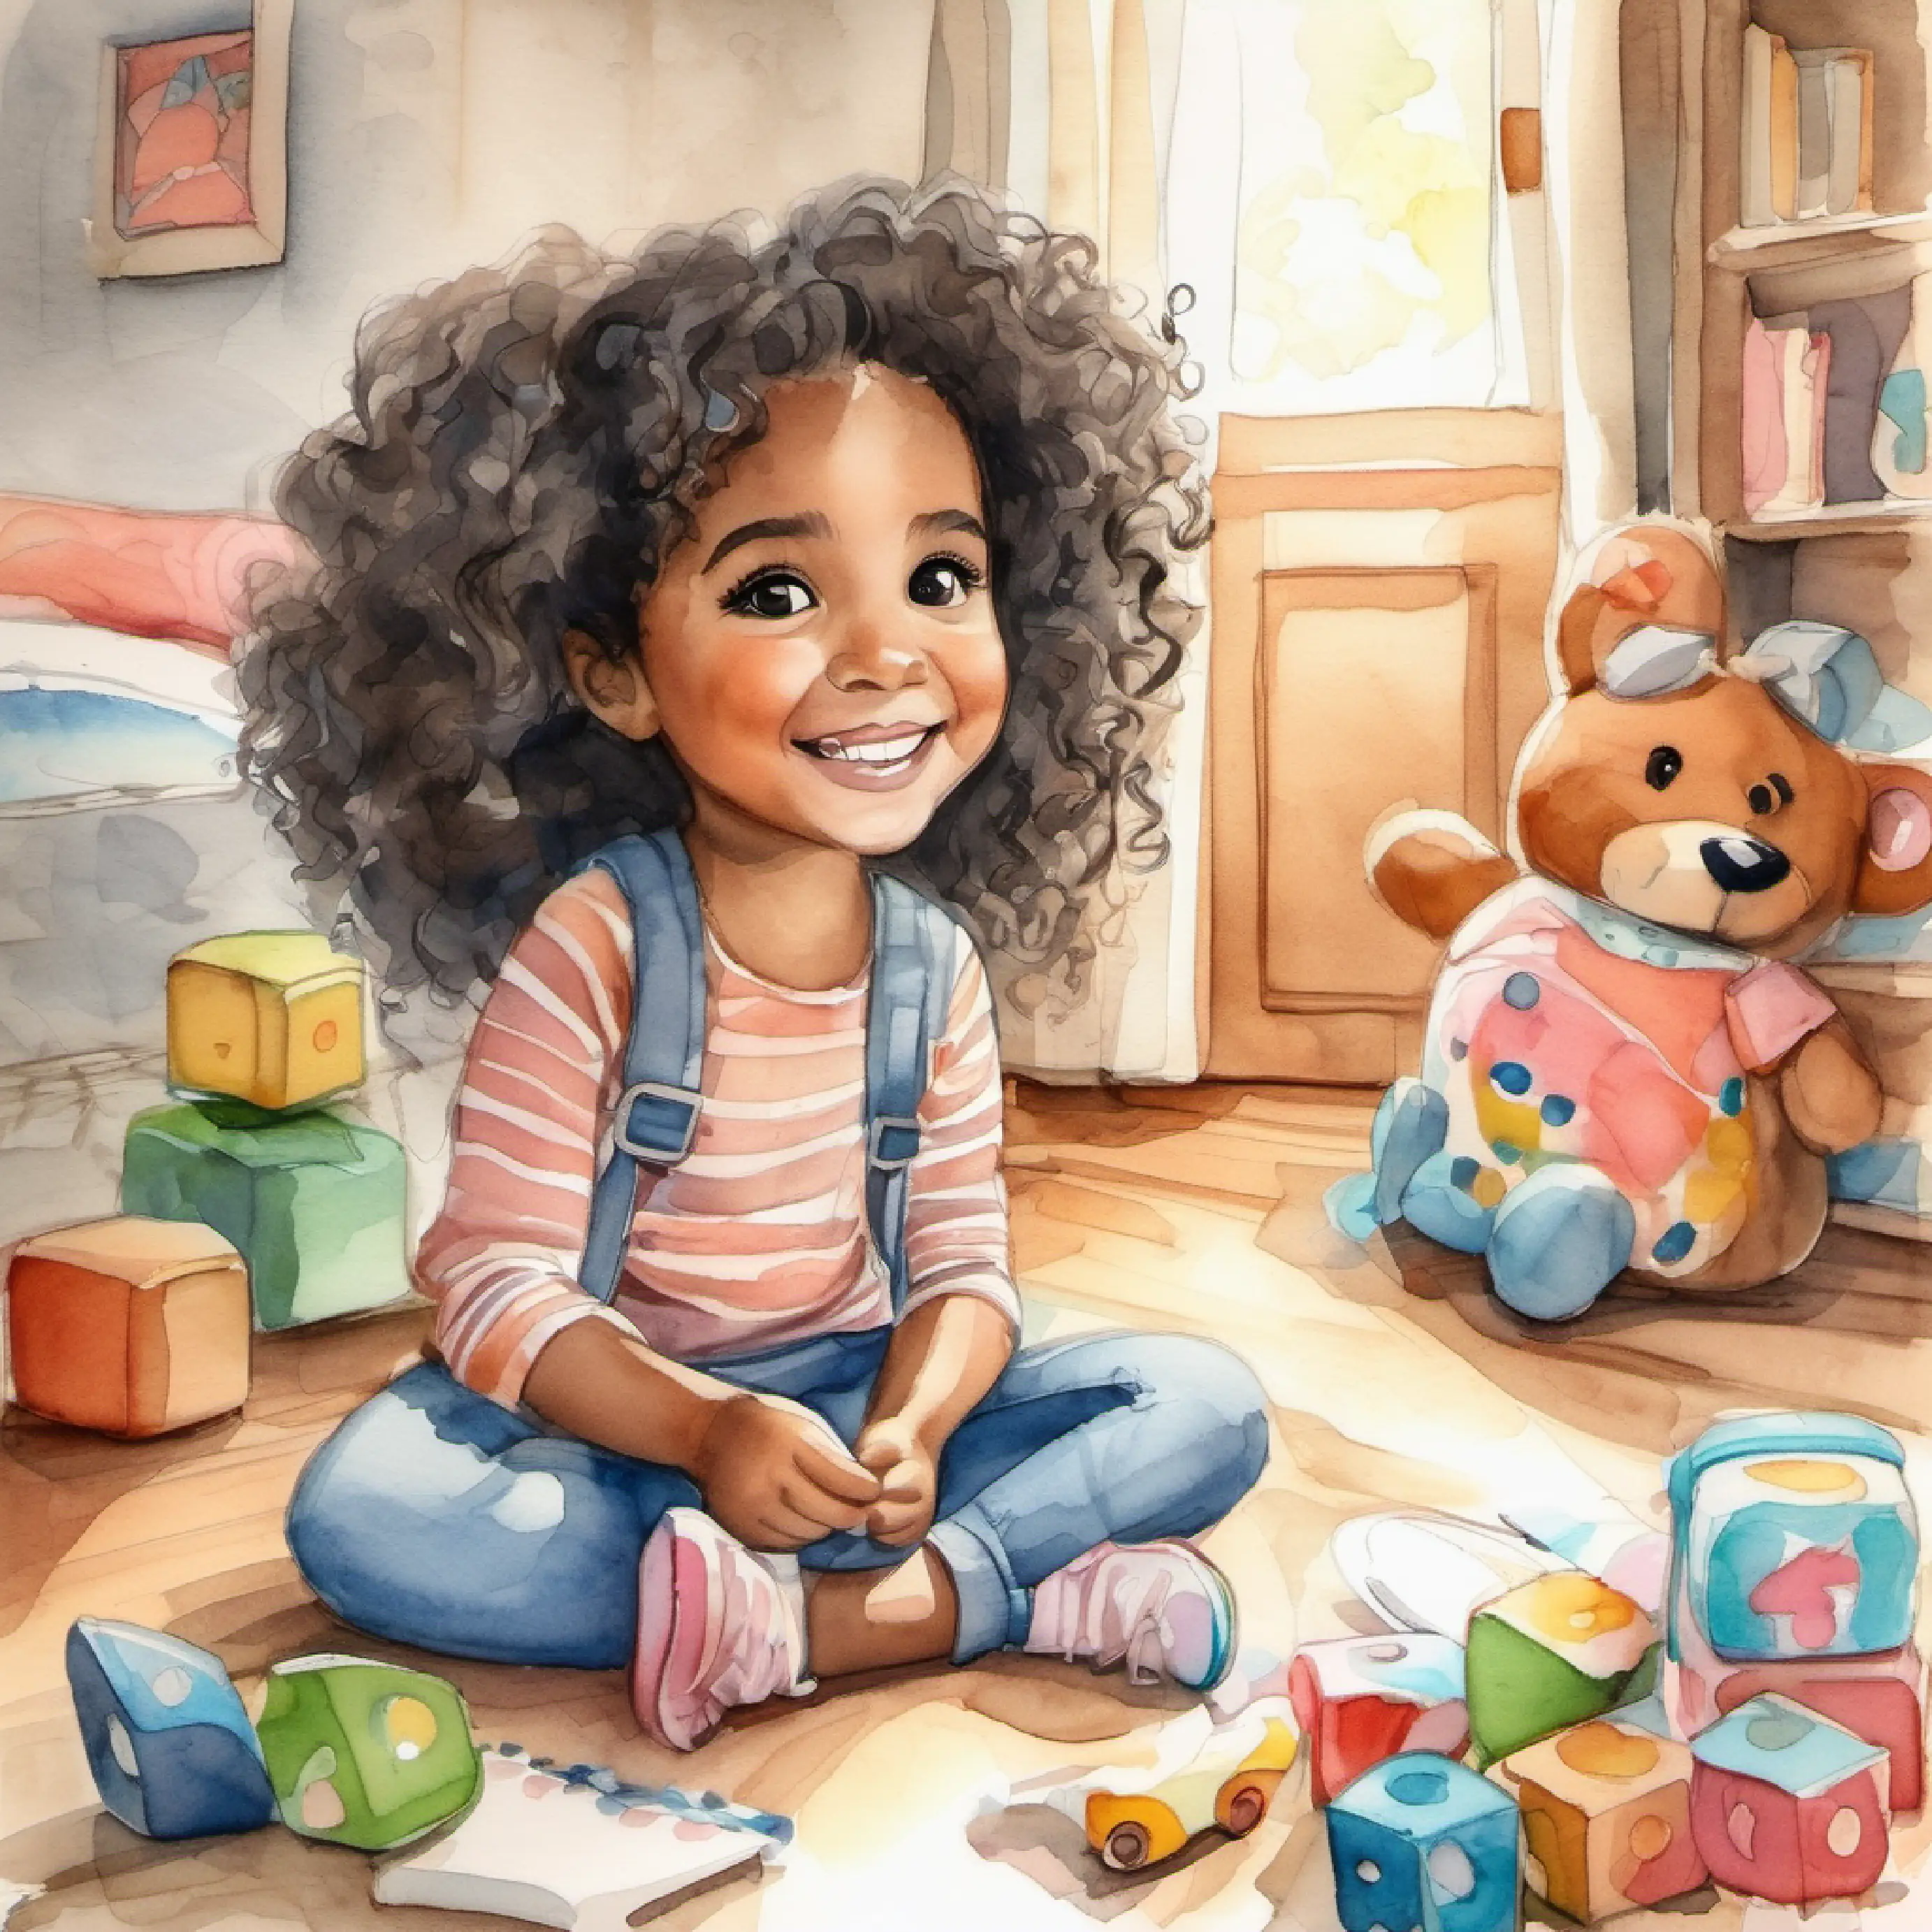 Cheerful girl, brown skin, curly black hair, big brown eyes, in her room playing with toys.